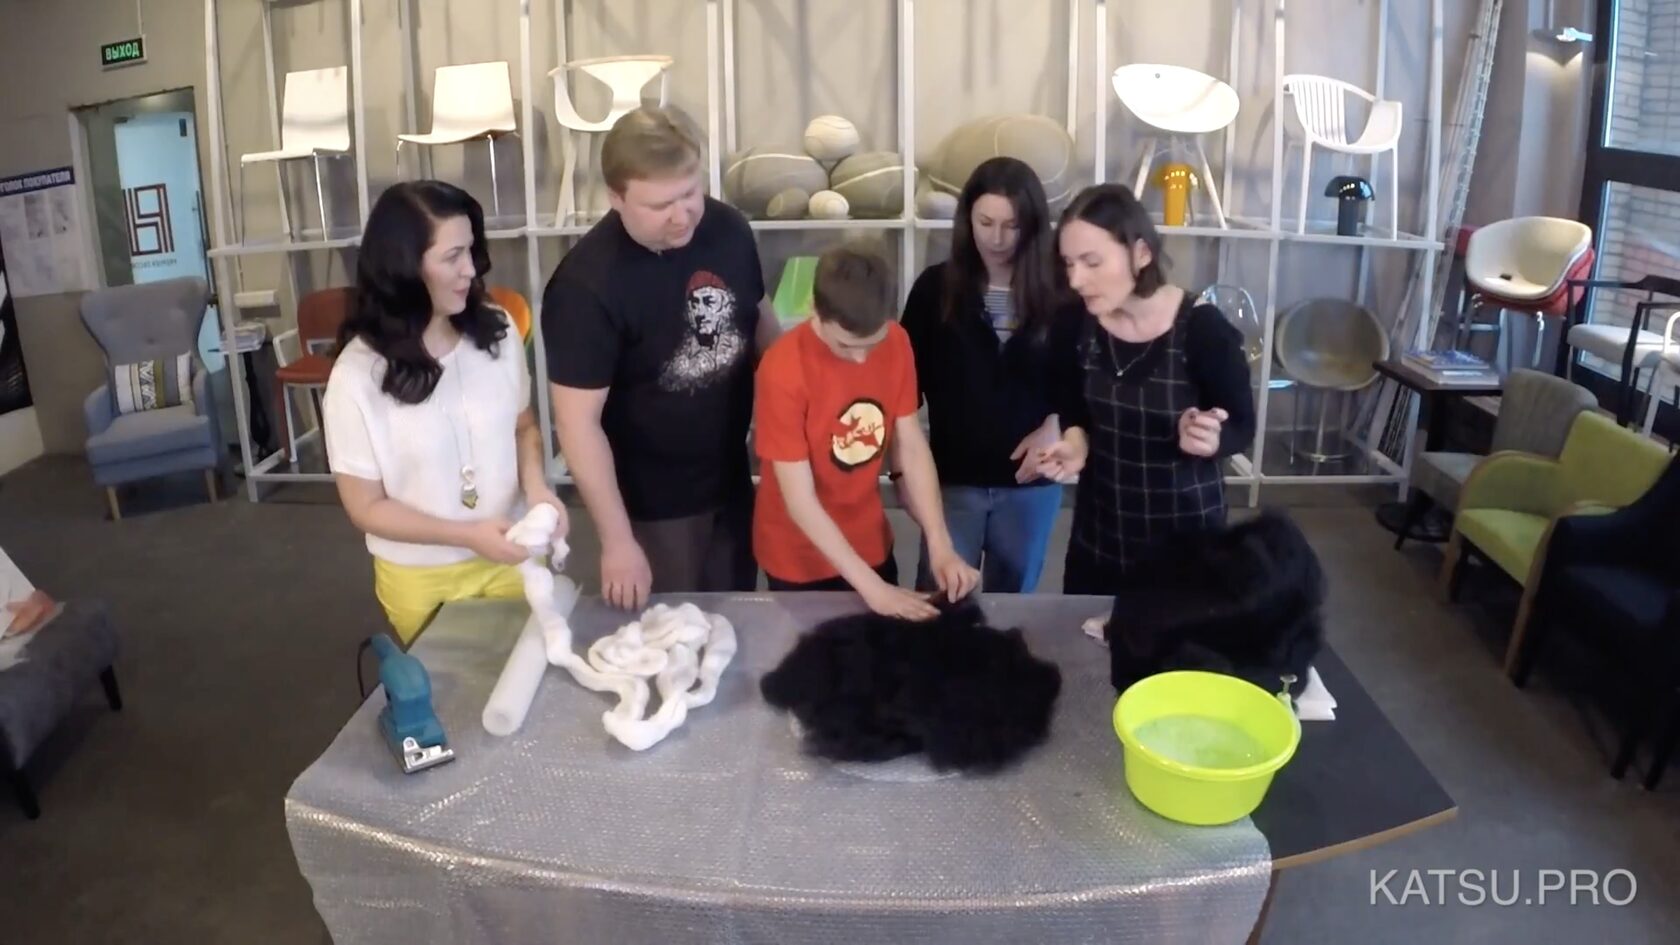 A group of people make a felted wool stone pillow in a TV show